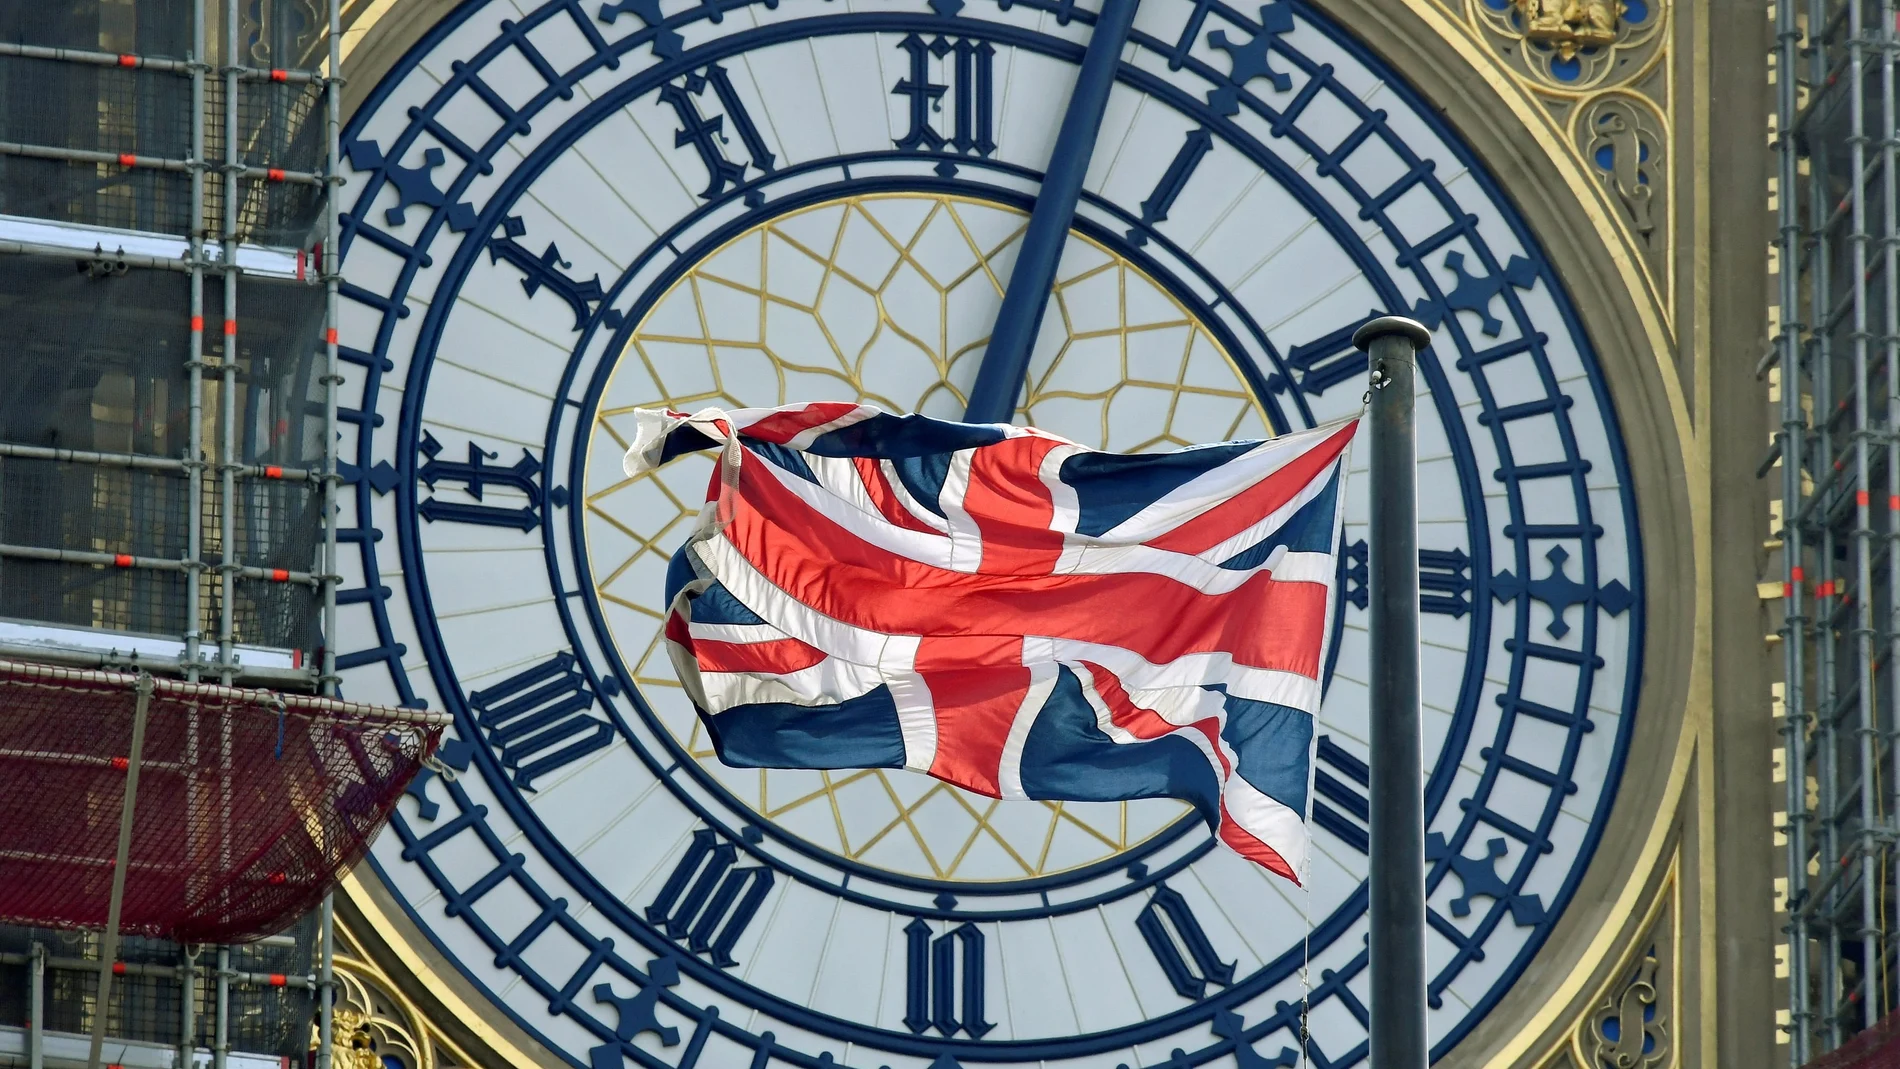 FILE PHOTO: British Union Jack flag flies in front of the clock face of Big Ben in London